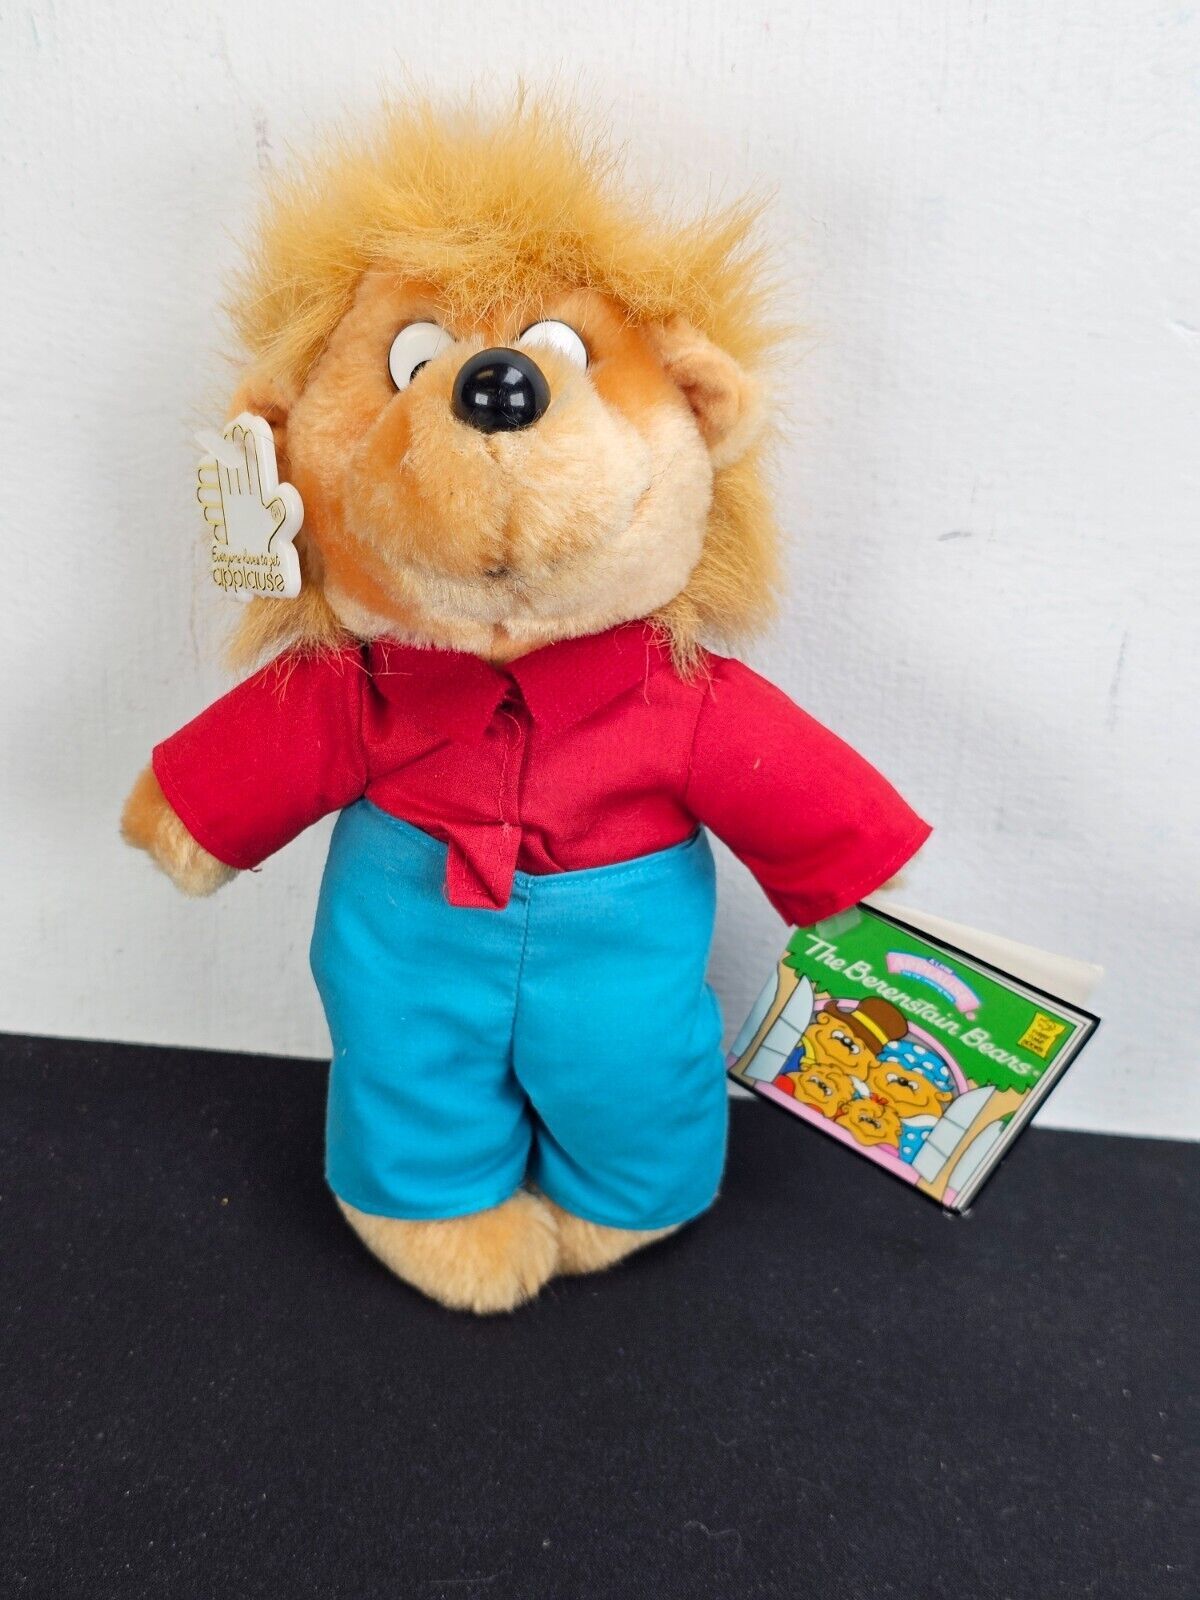 Applause Vintage Plush Berenstain Bears Brother 8” 1989 Red Blue Stuffed Animal  - $6.88